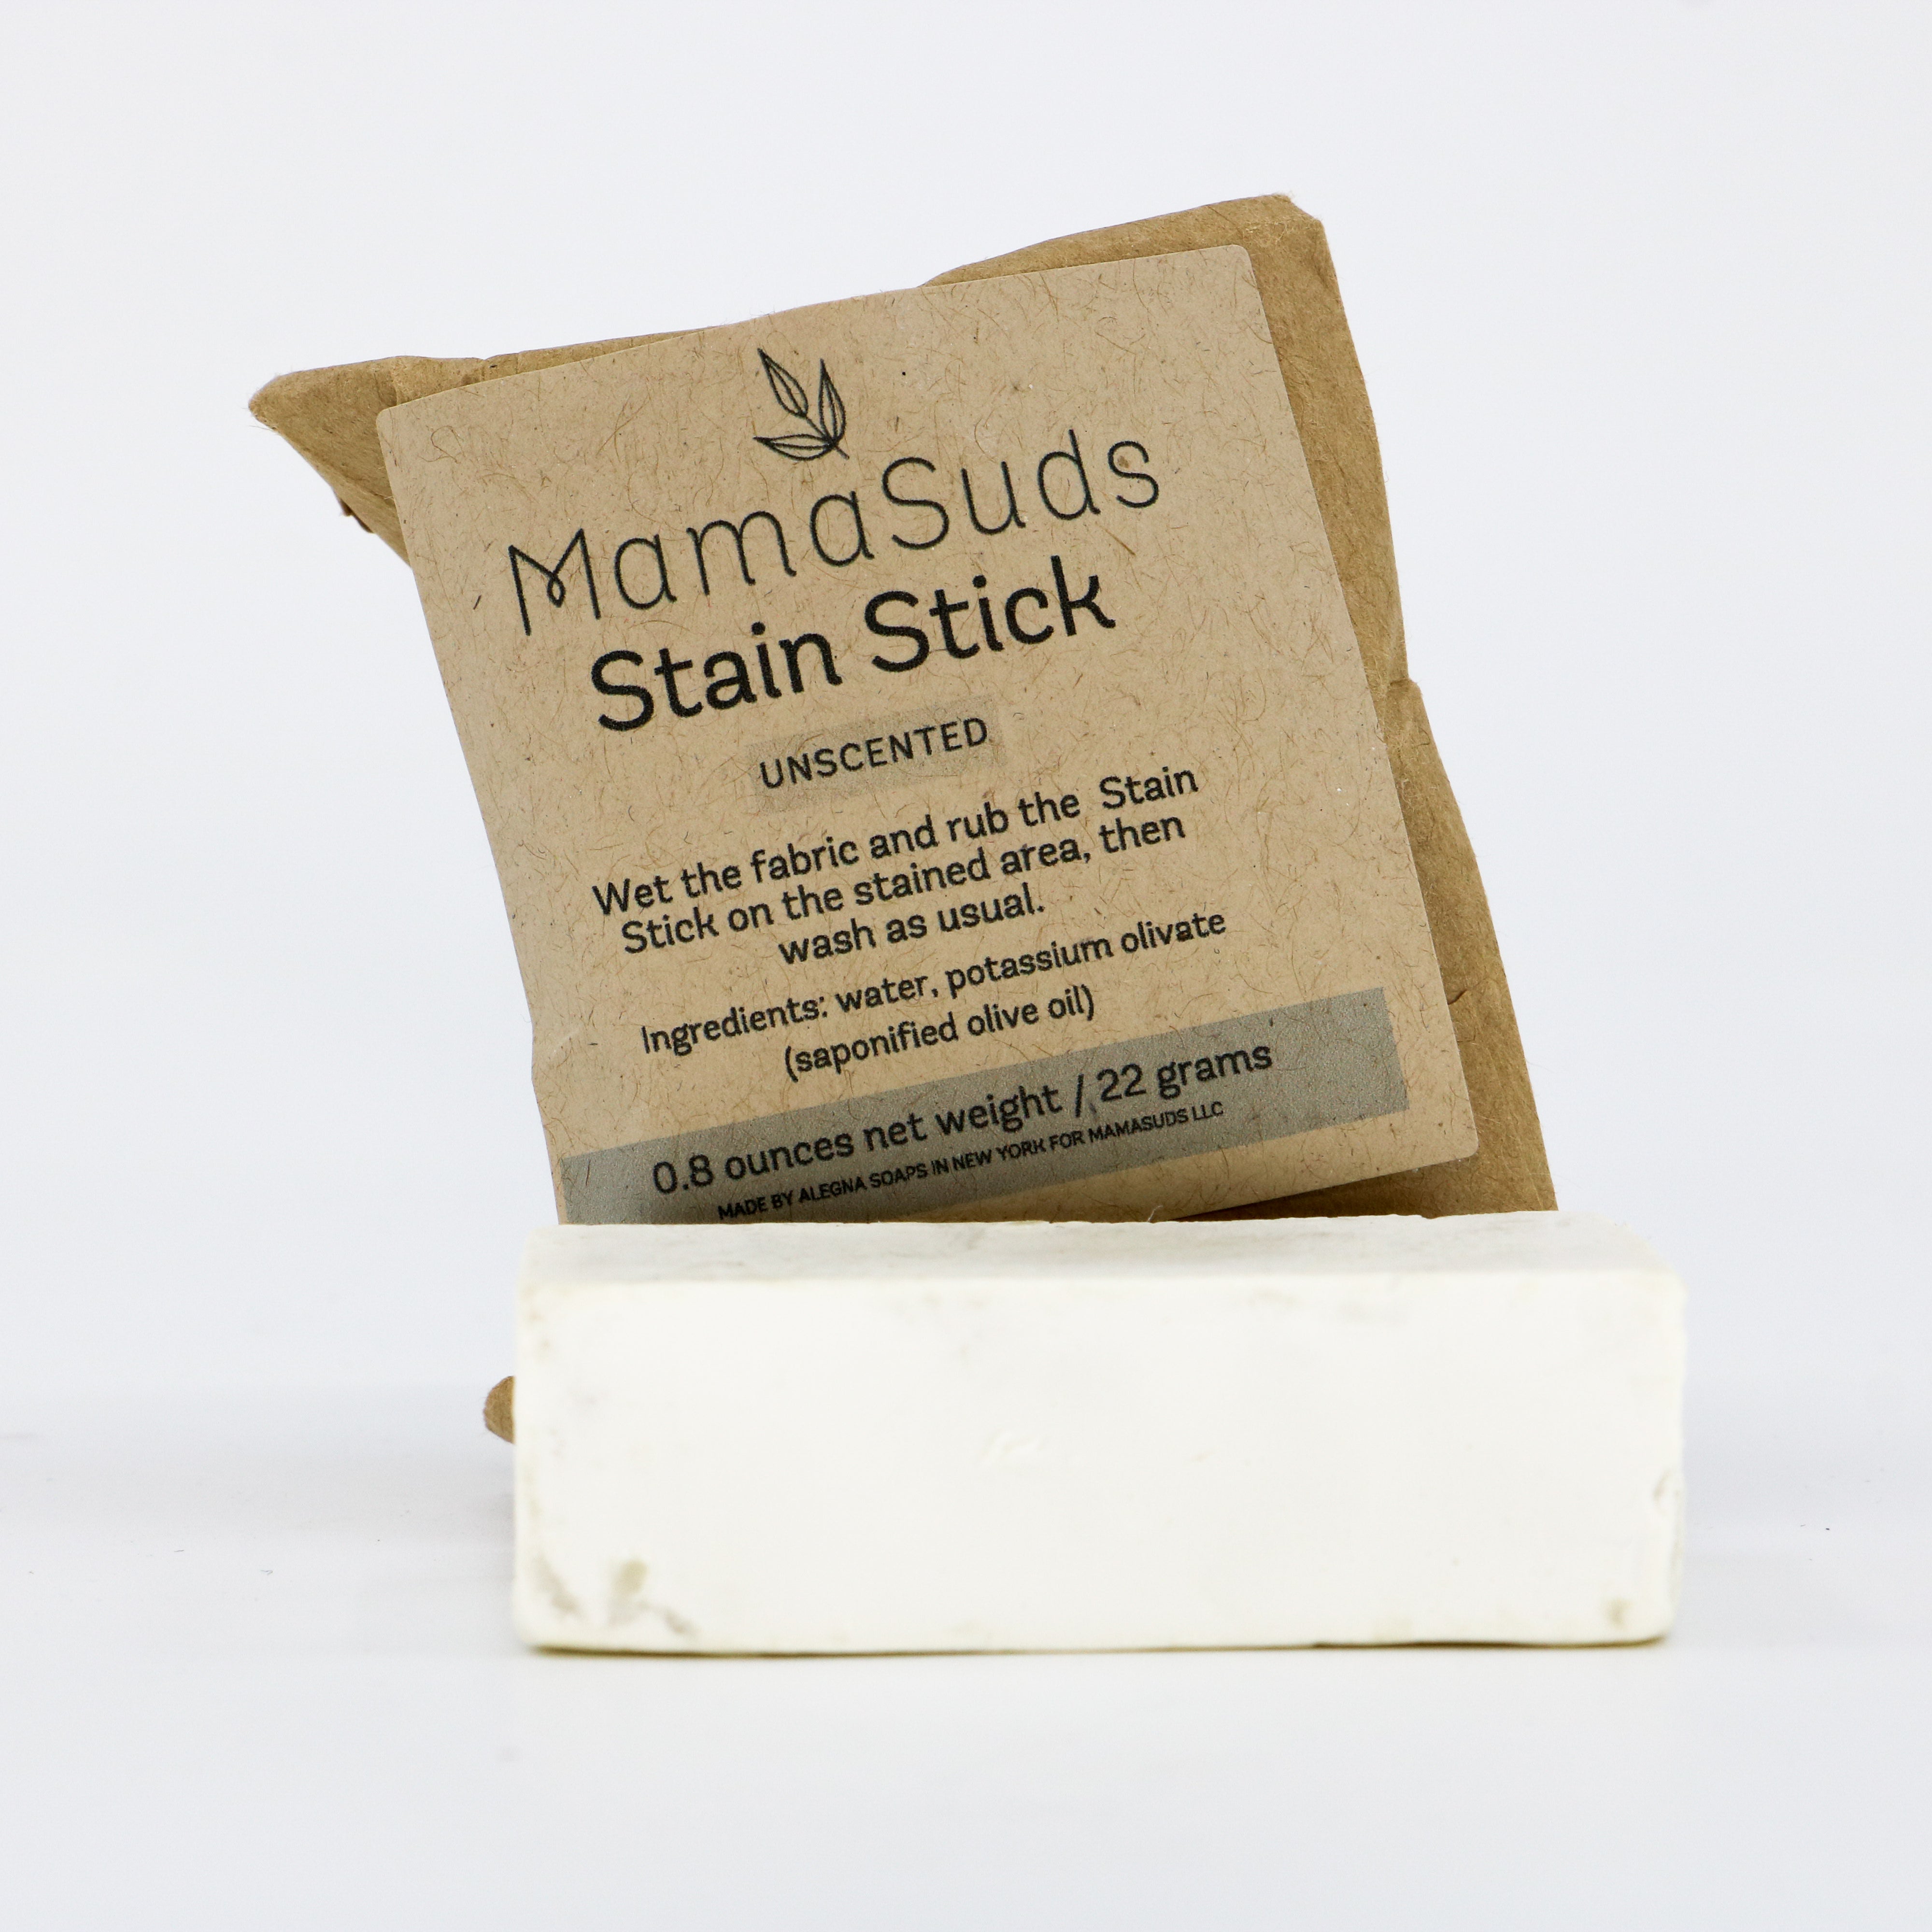 Laundry Stain Stick - The Mockingbird Apothecary & General Store